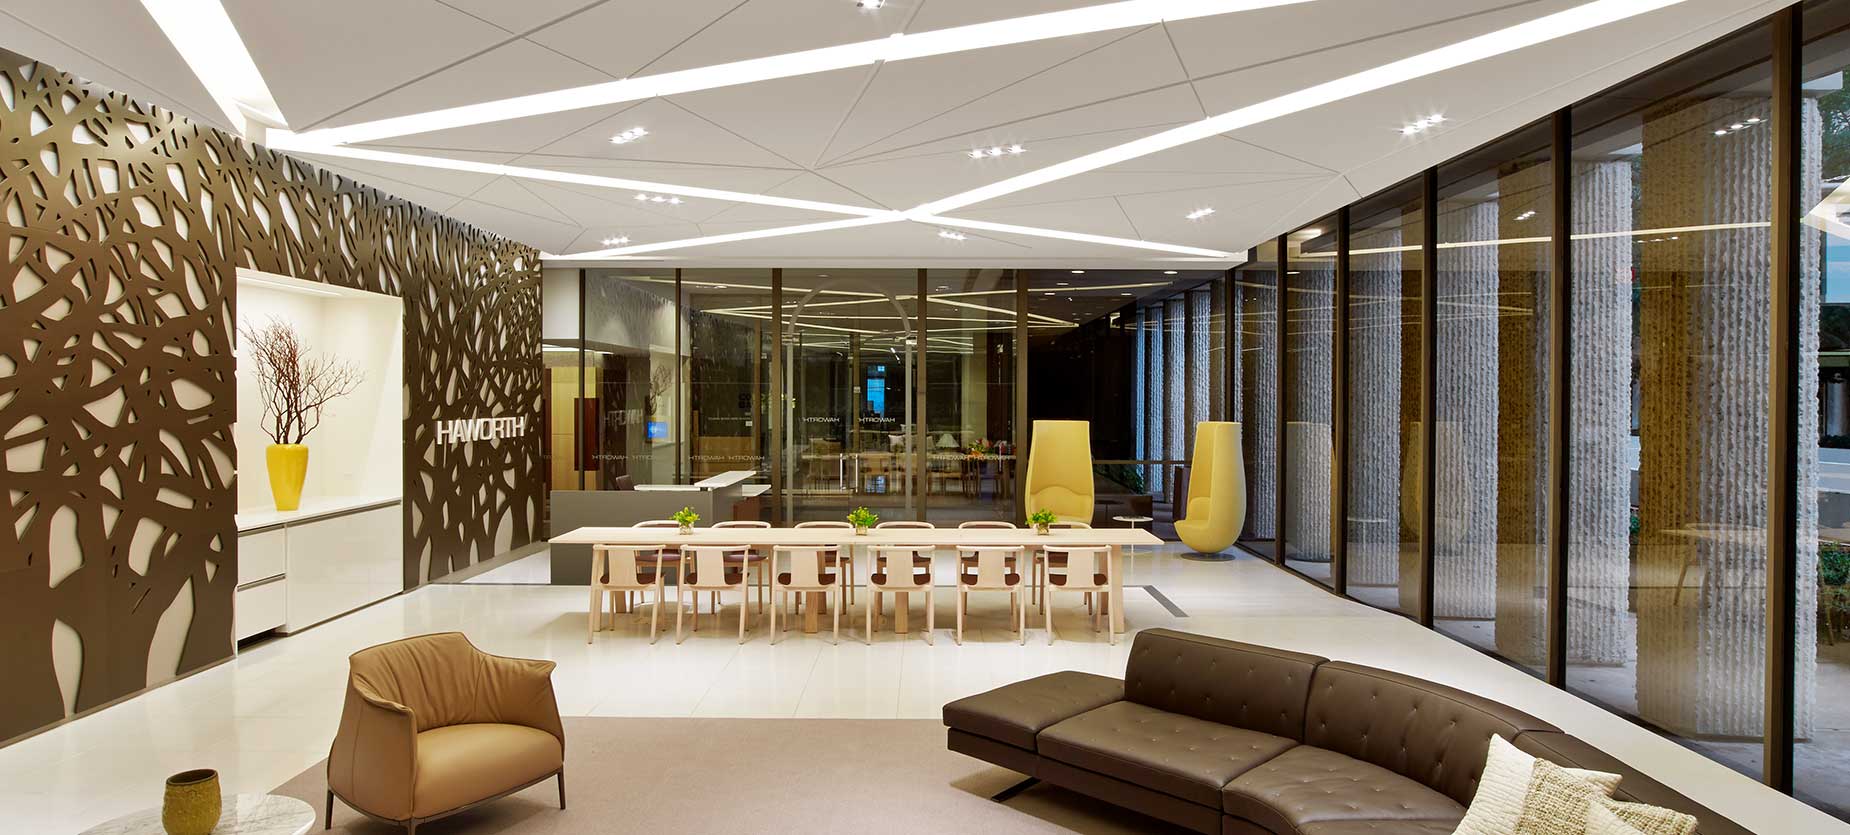 This Social Space demonstrates how various furniture settings can be combined to serve multiple functions efficiently on a floor plate. Not only does it serve as traditional reception seating due to It’s proximity to the main entry, the adjacent communal table create an activated meeting zone. The dimensional feature wall echoing the live oak trees at the exterior of the space add to the ambience.